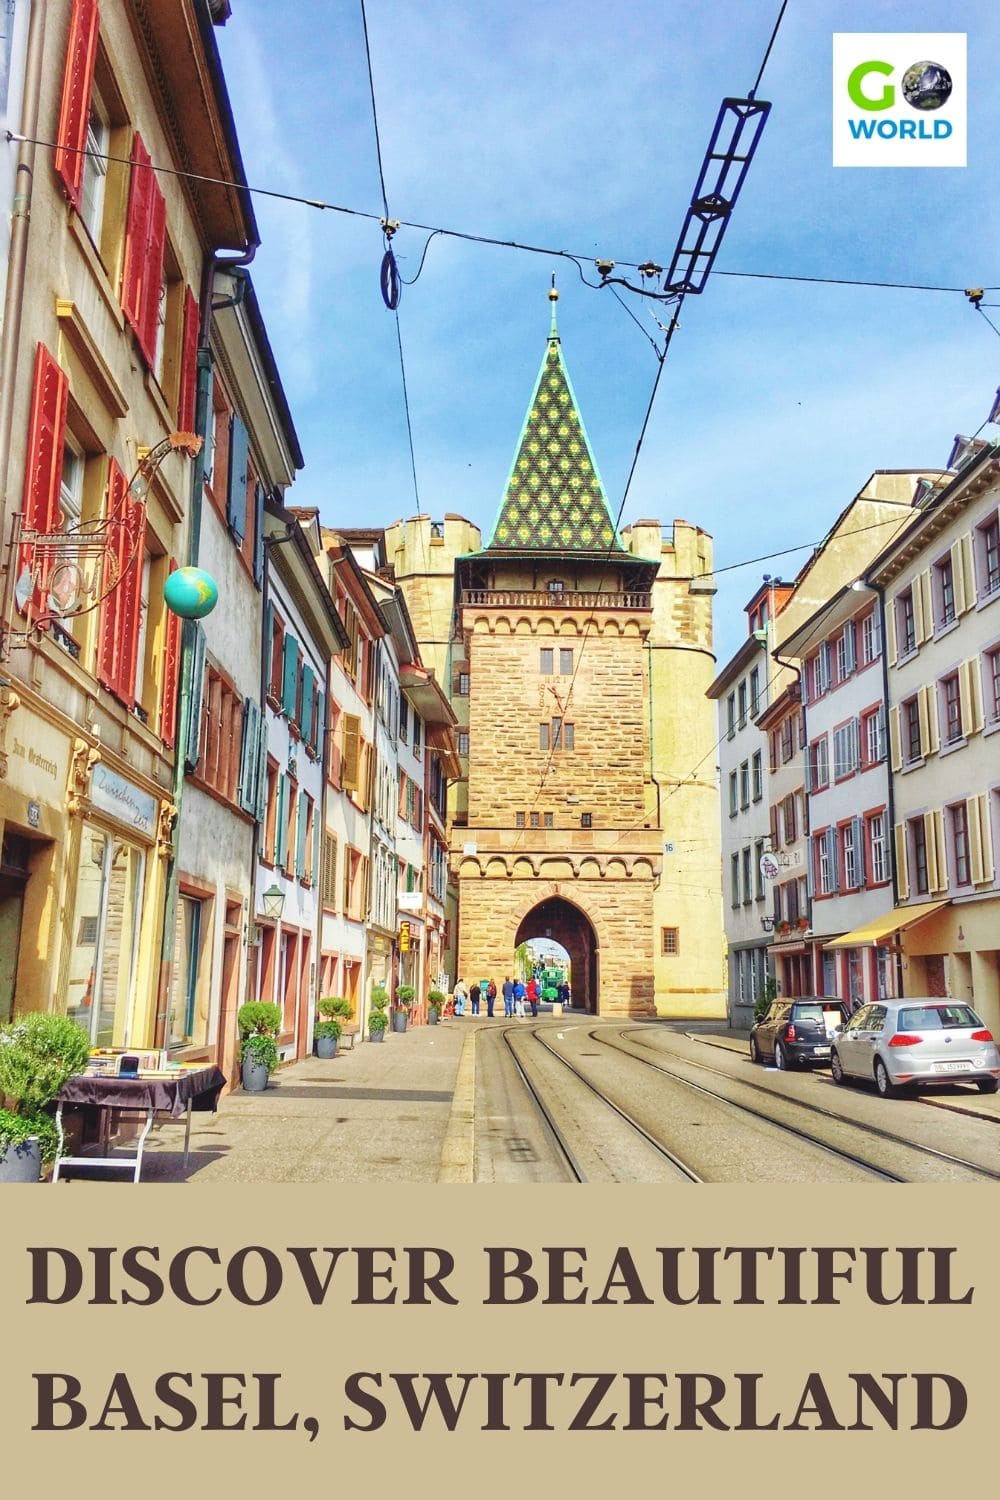 Basel is a beautiful but highly underrated city. Check out these things to do in Basel, Switzerland and get there before the secret is out. #baselswitzerland